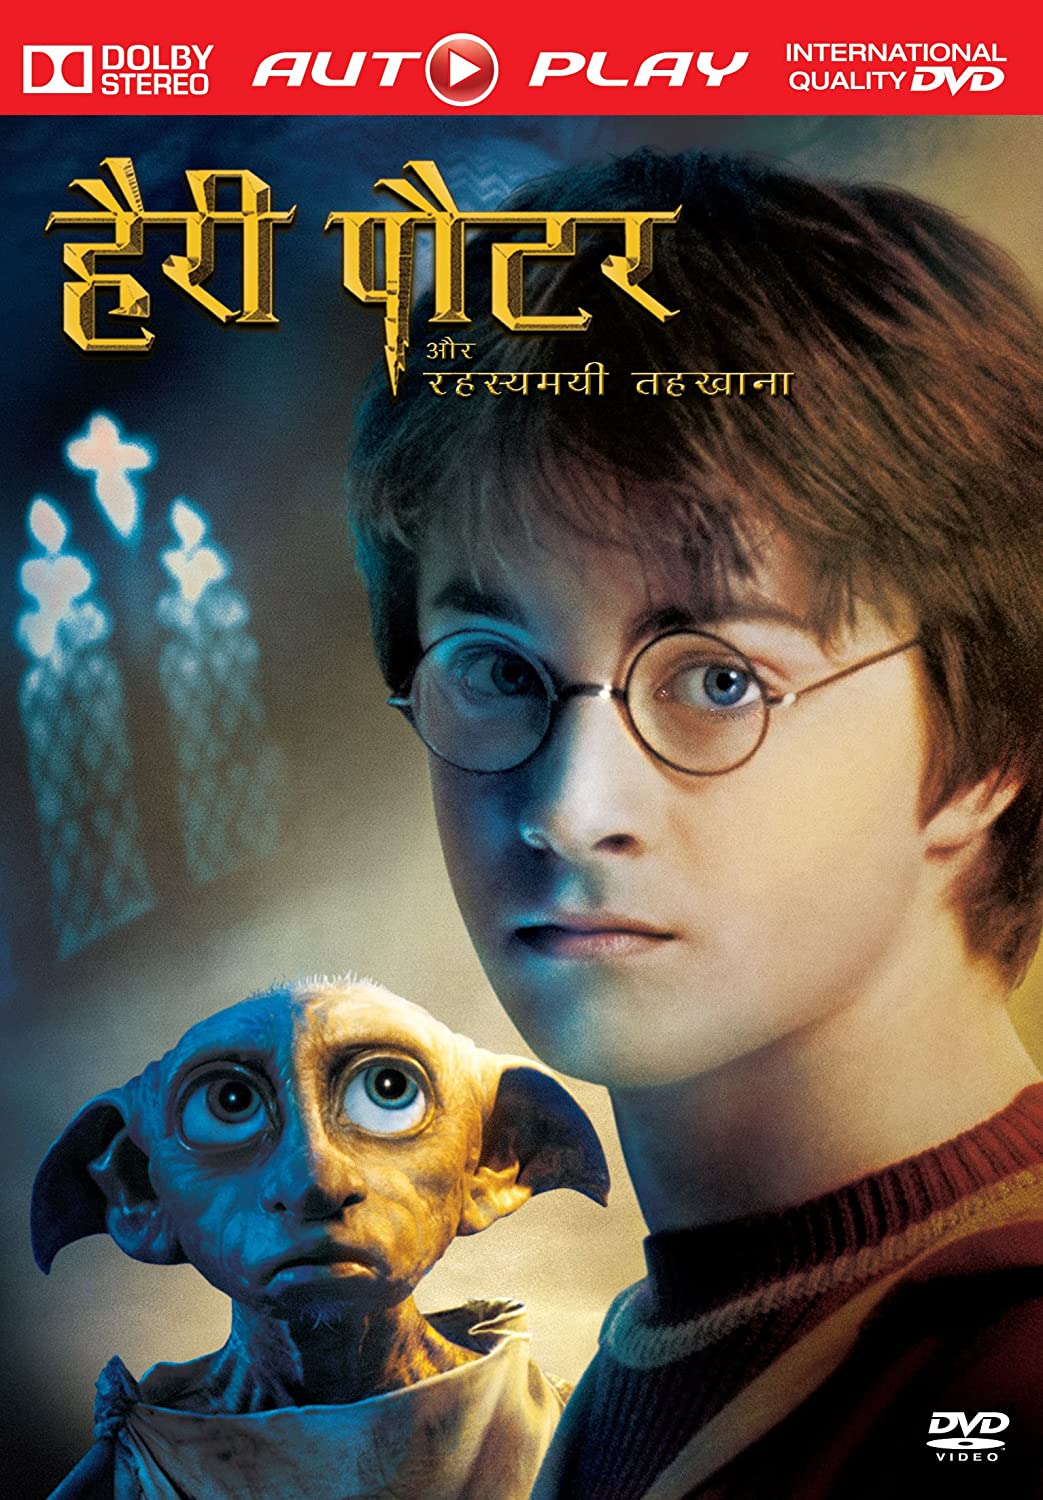 harry potter in hindi download